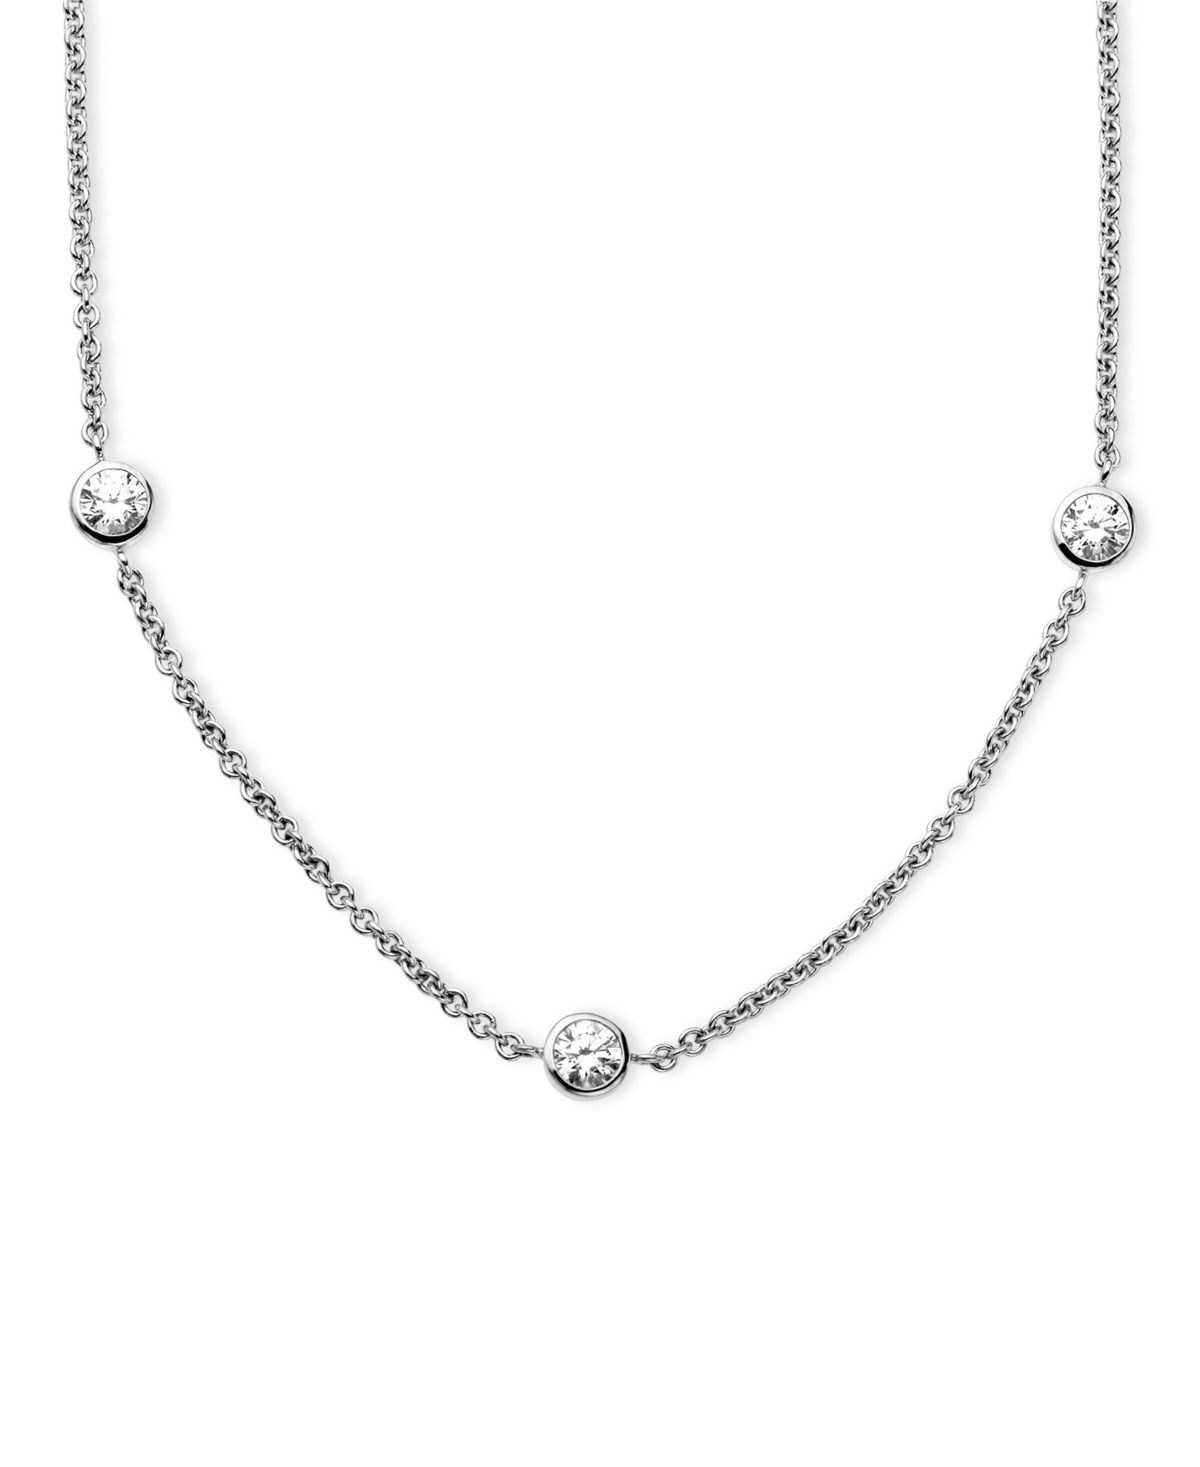 Arabella Sterling Silver Necklace, White Round-cut Cubic Zirconia 7-station Necklace (3-1/6 Ct. T.w.)